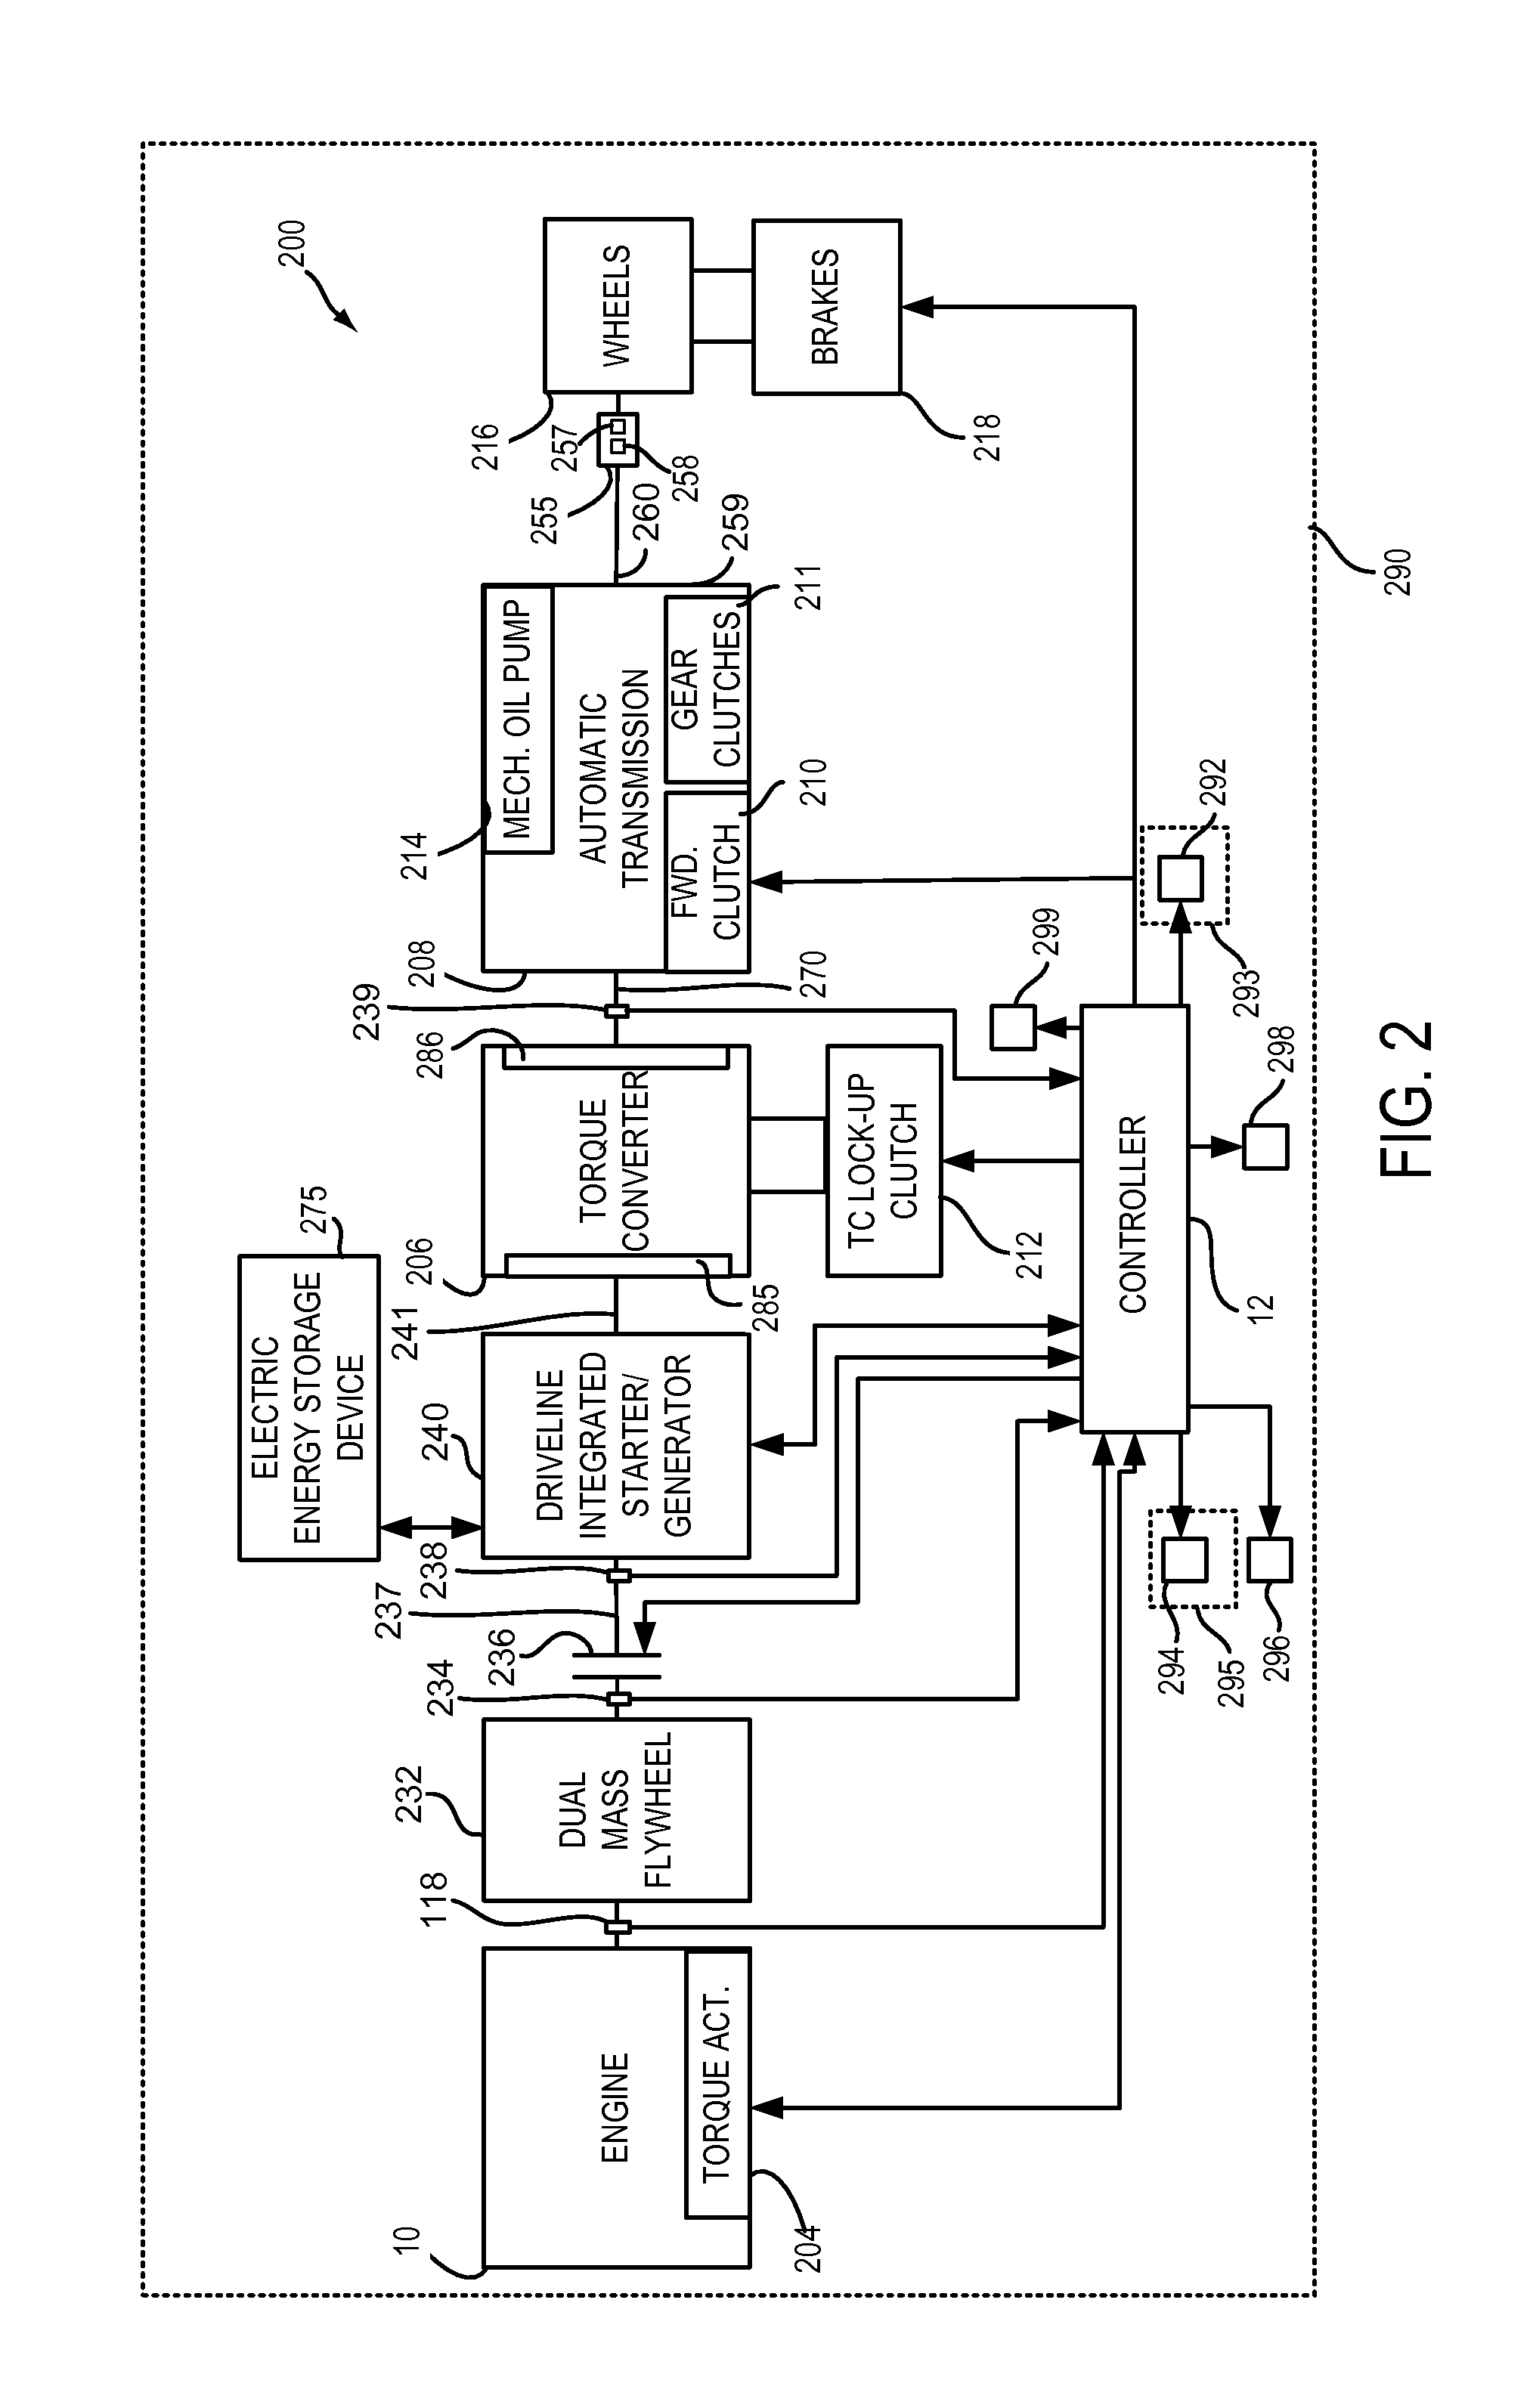 Methods and systems for engine cranking